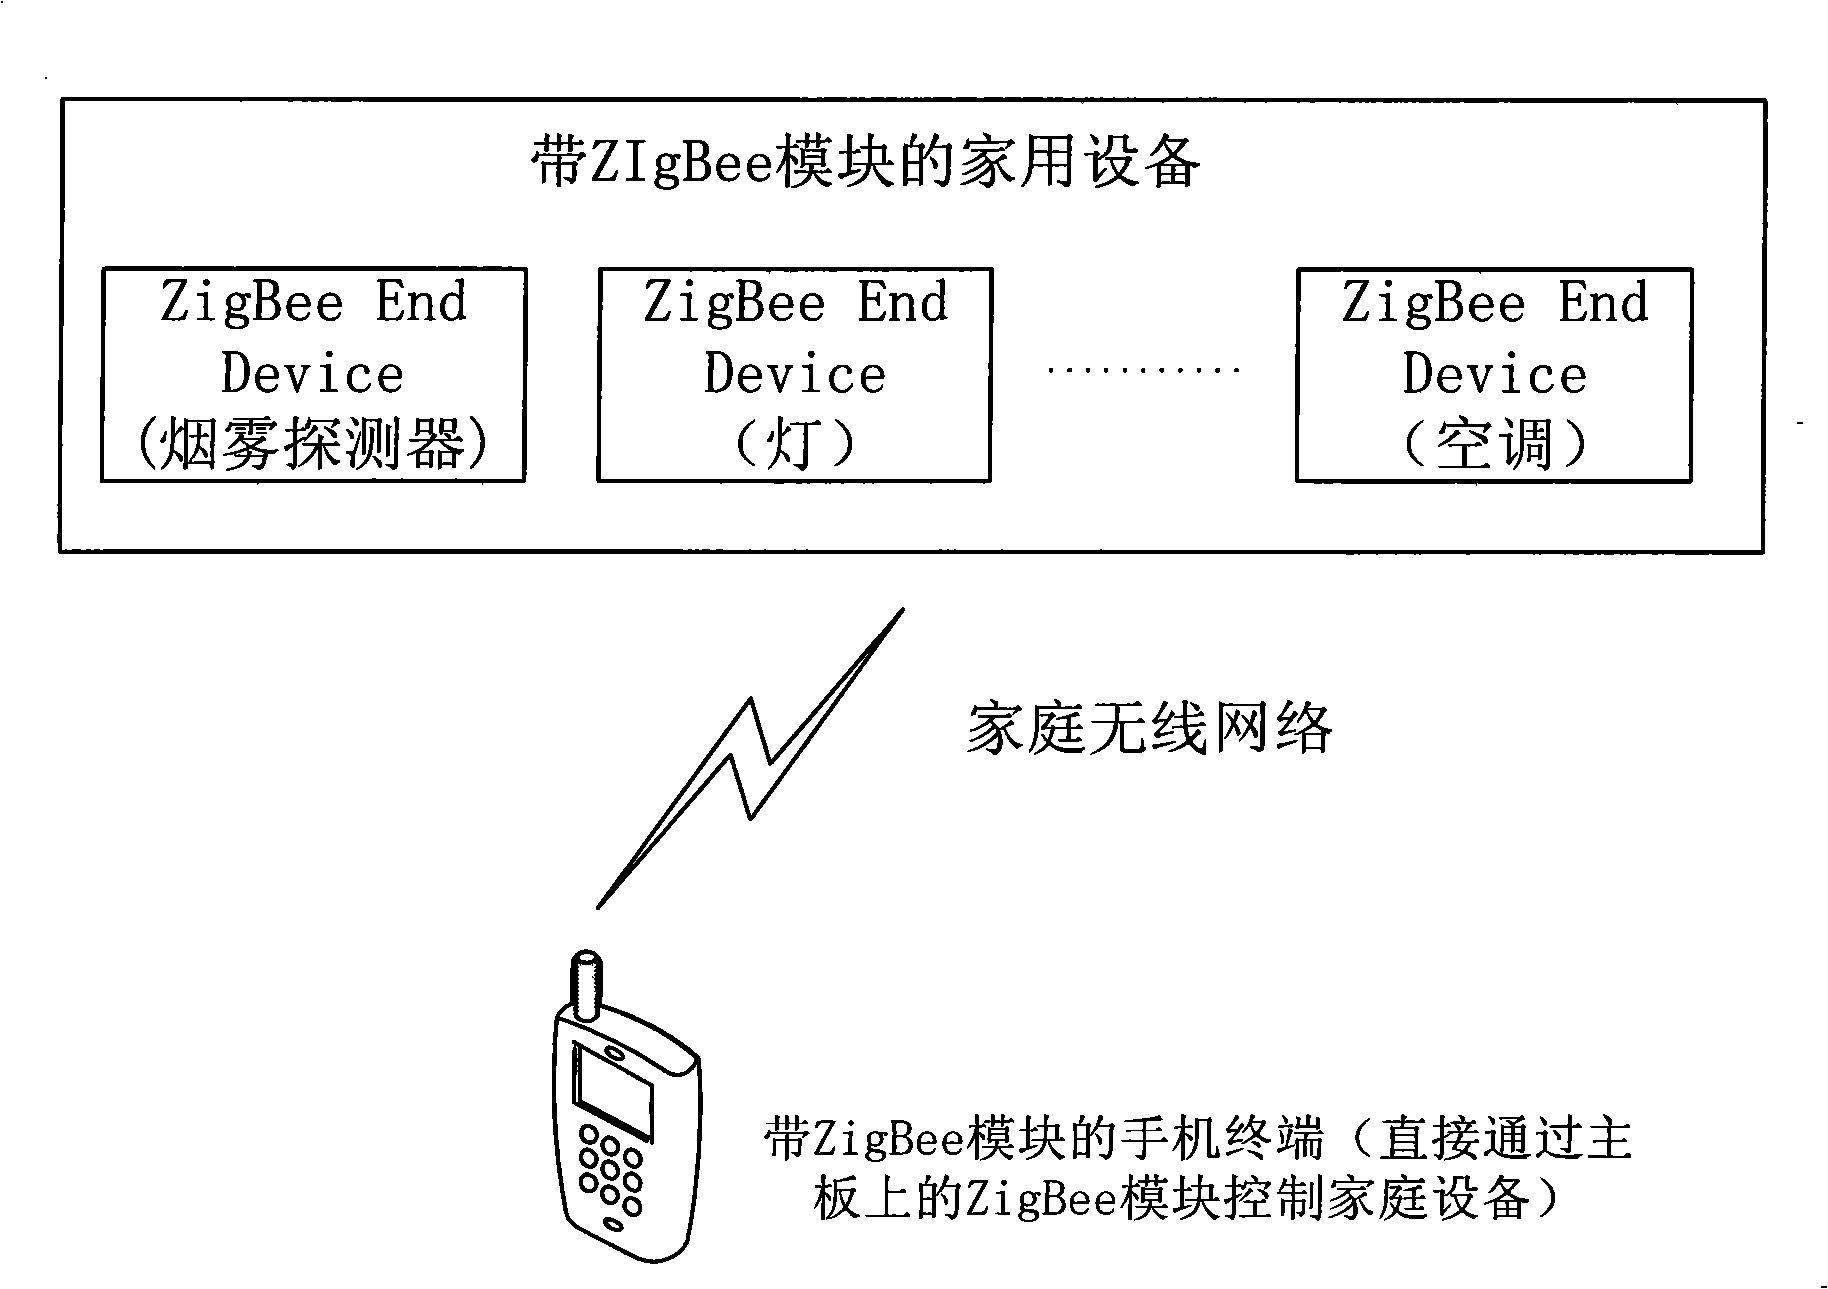 Mobile phone based on ZigBee technology and remote wireless control method